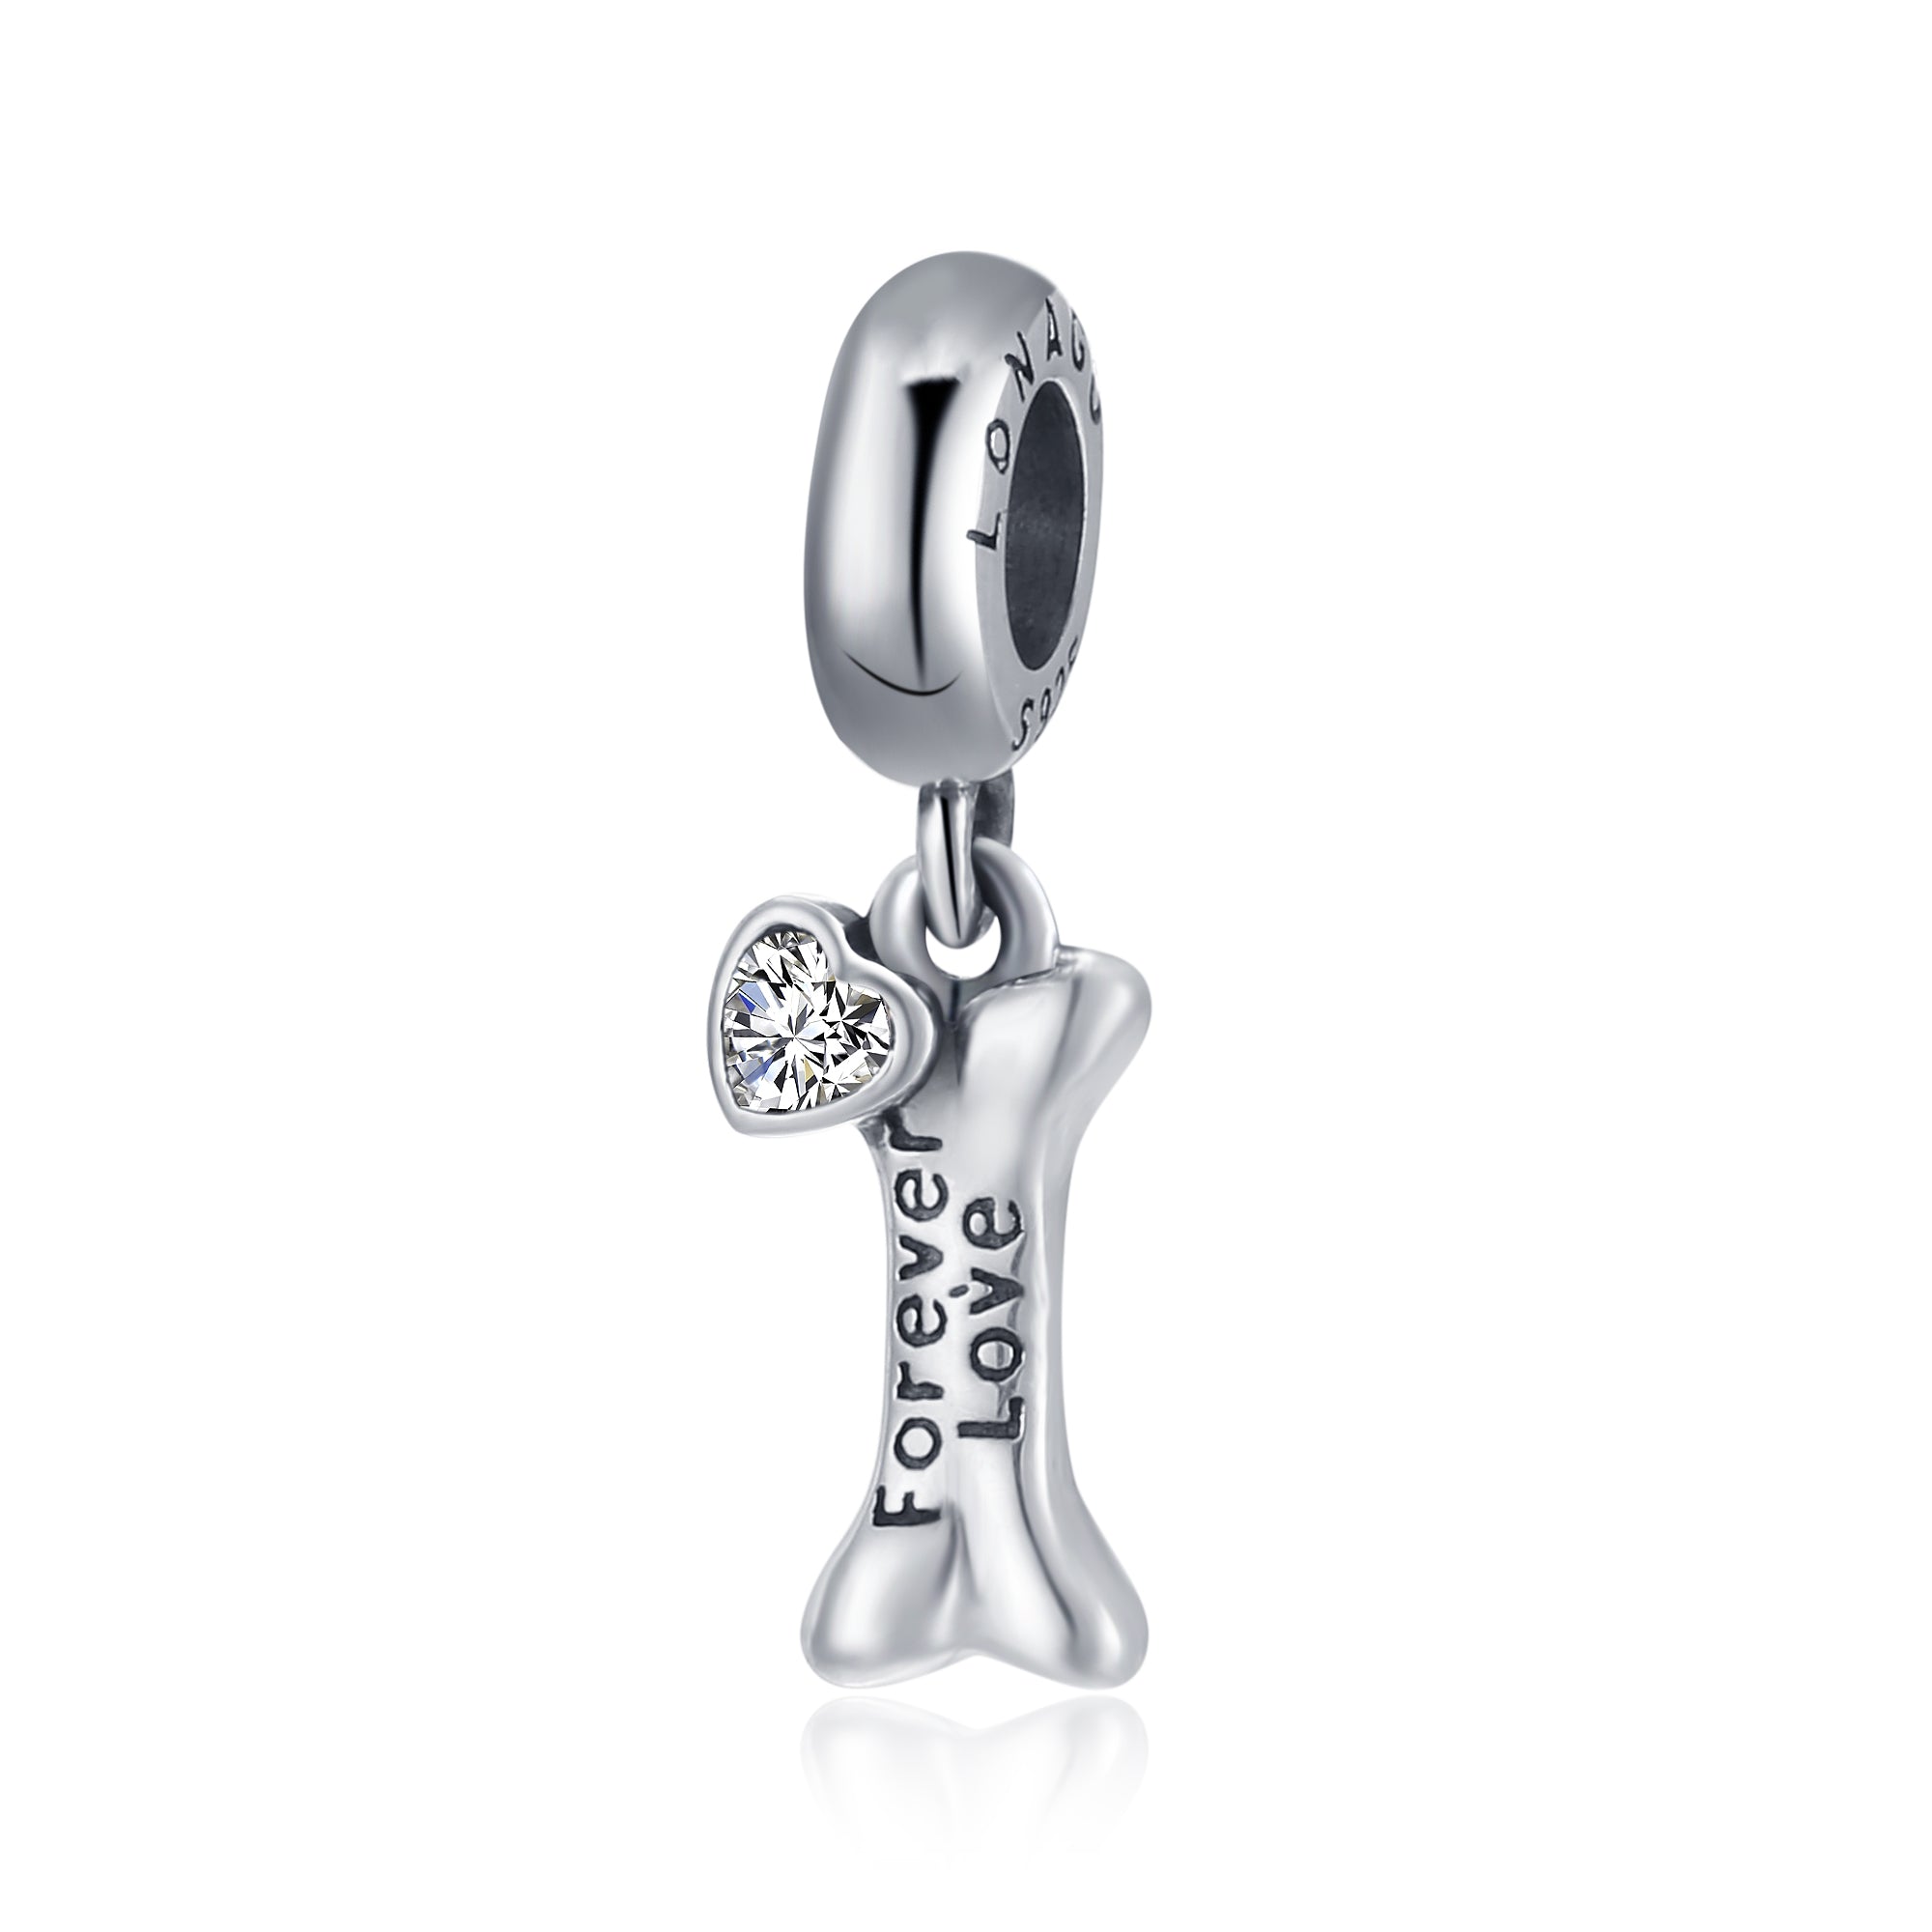 Bracelet Charms Accessory Silver Forever Love Puppy Lovely Bone Charms